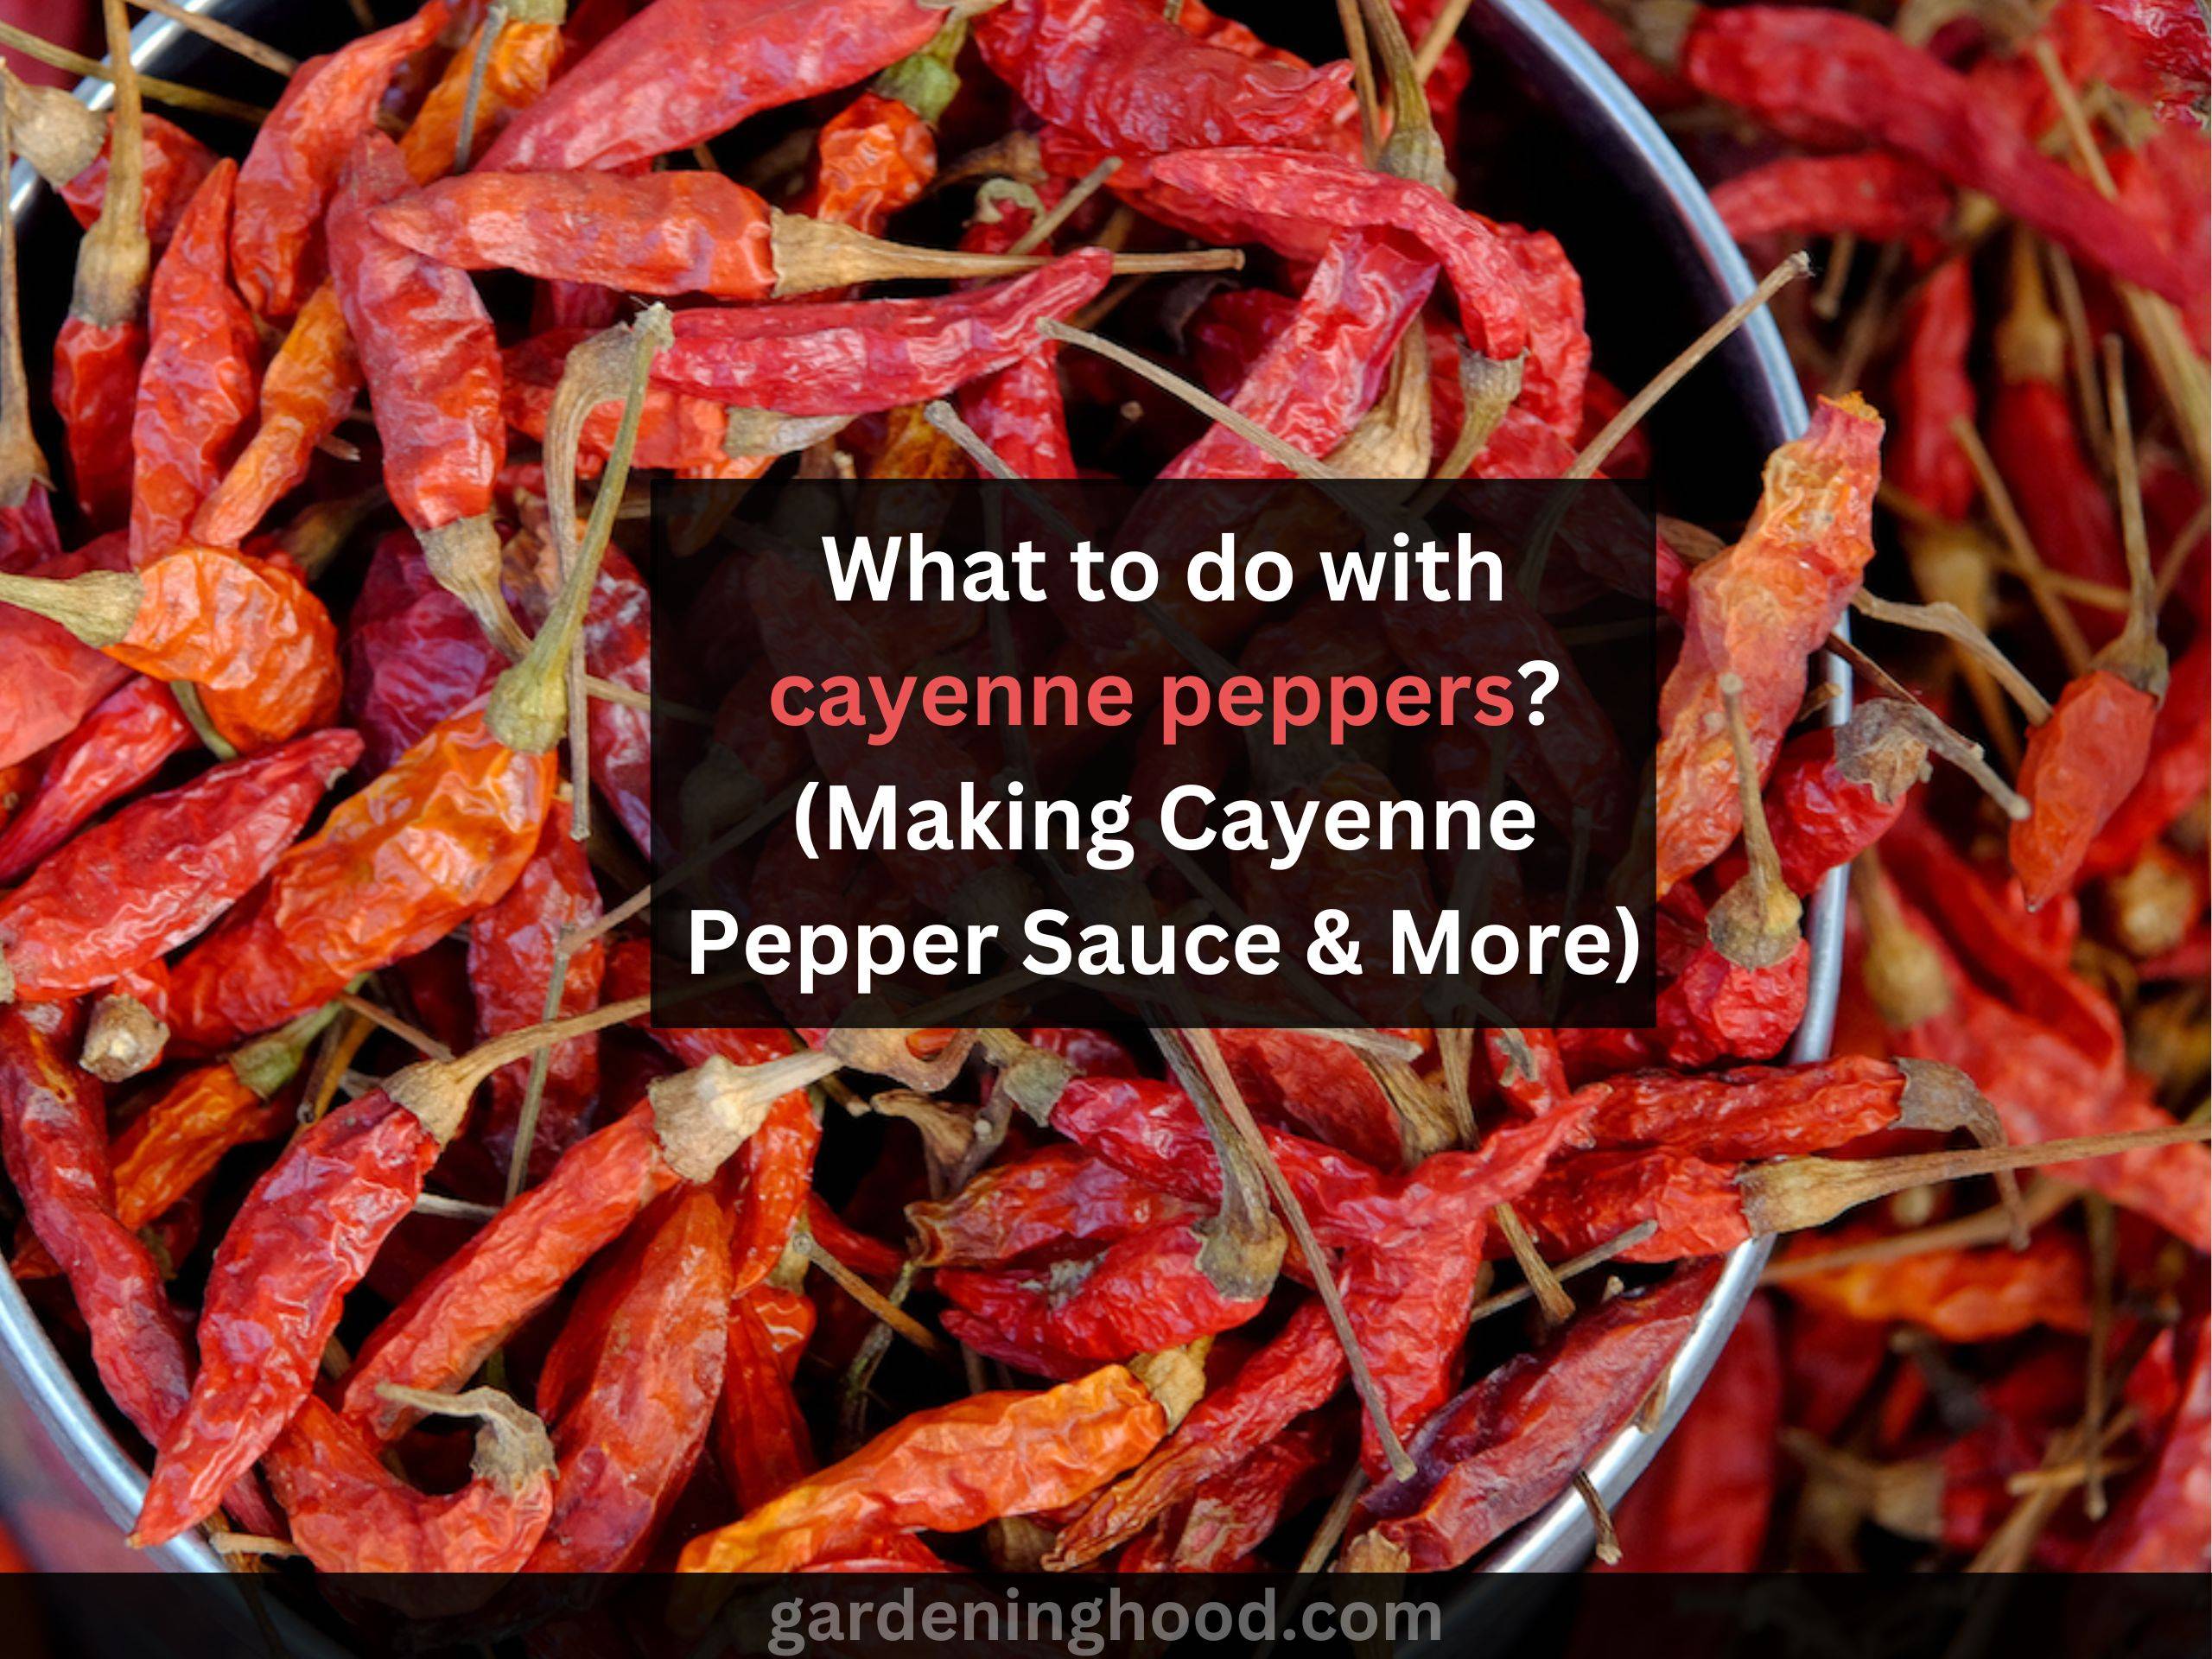 What to do with cayenne peppers? (Making Cayenne Pepper Sauce & More)